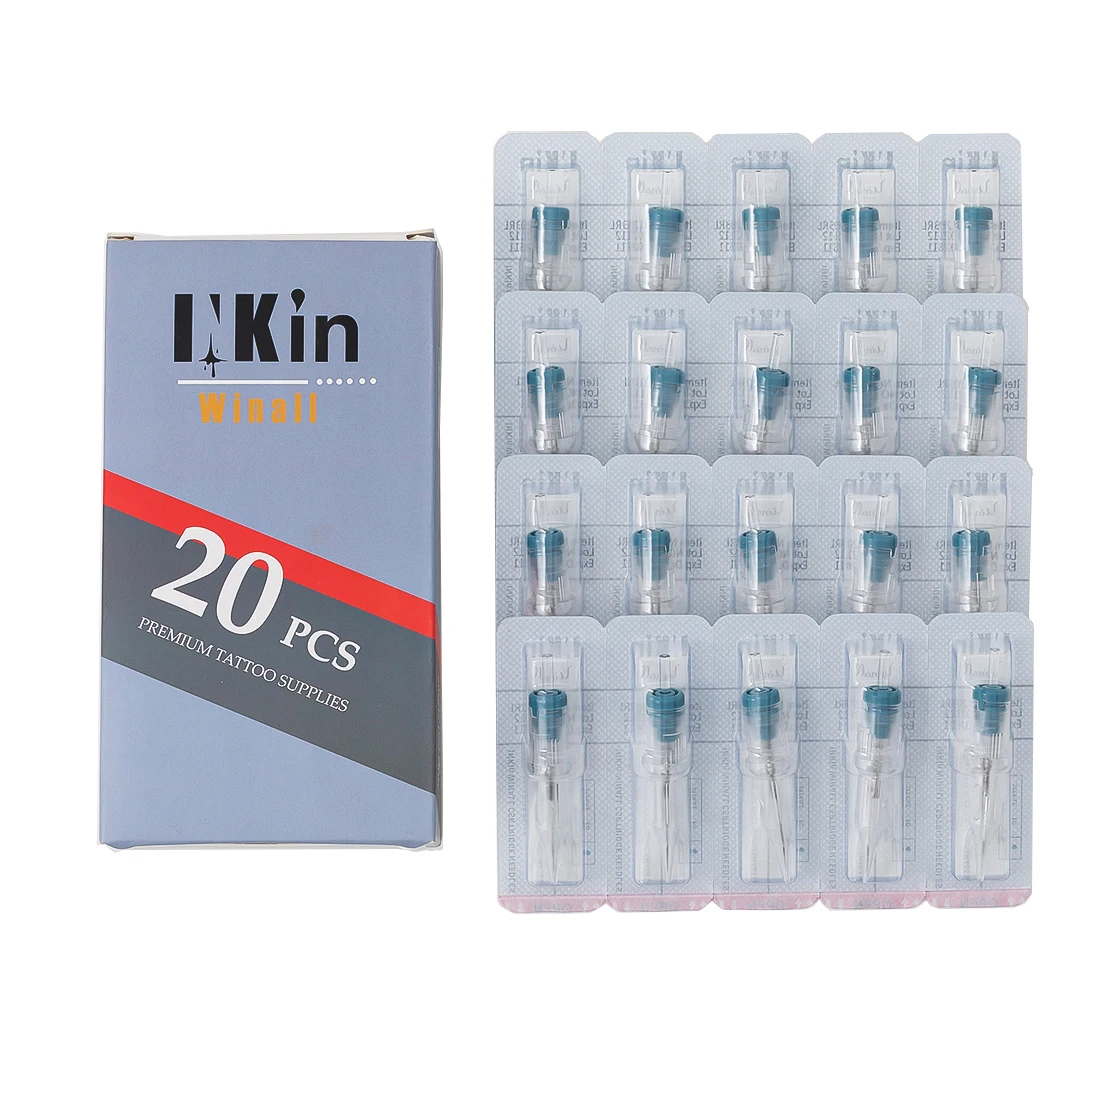 

INKIN WINALL Cartridge Tattoo Needles Round Liner Disposable Sterilized Safety Tattoo Needle for Cartridge Machines Grips